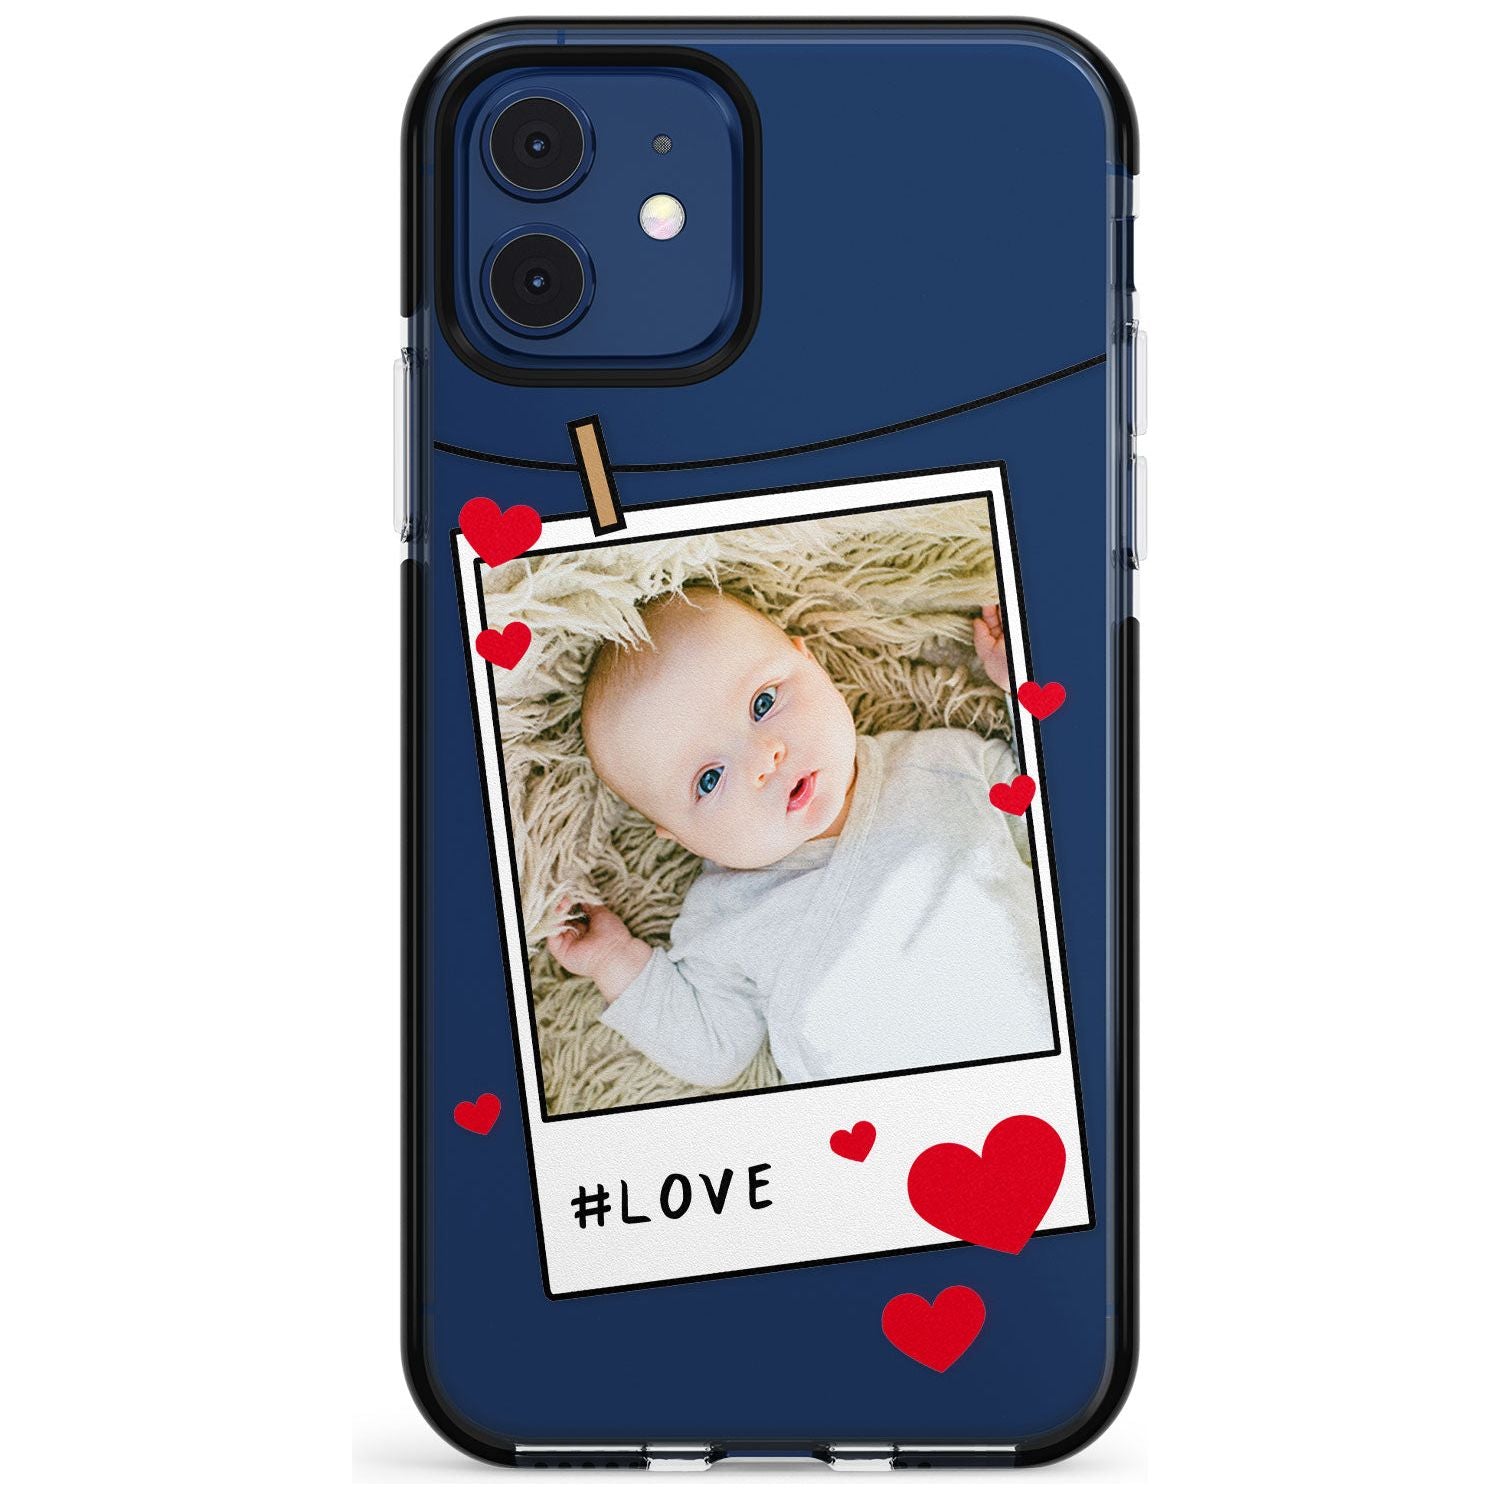 Love Instant Film Pink Fade Impact Phone Case for iPhone 11 Pro Max